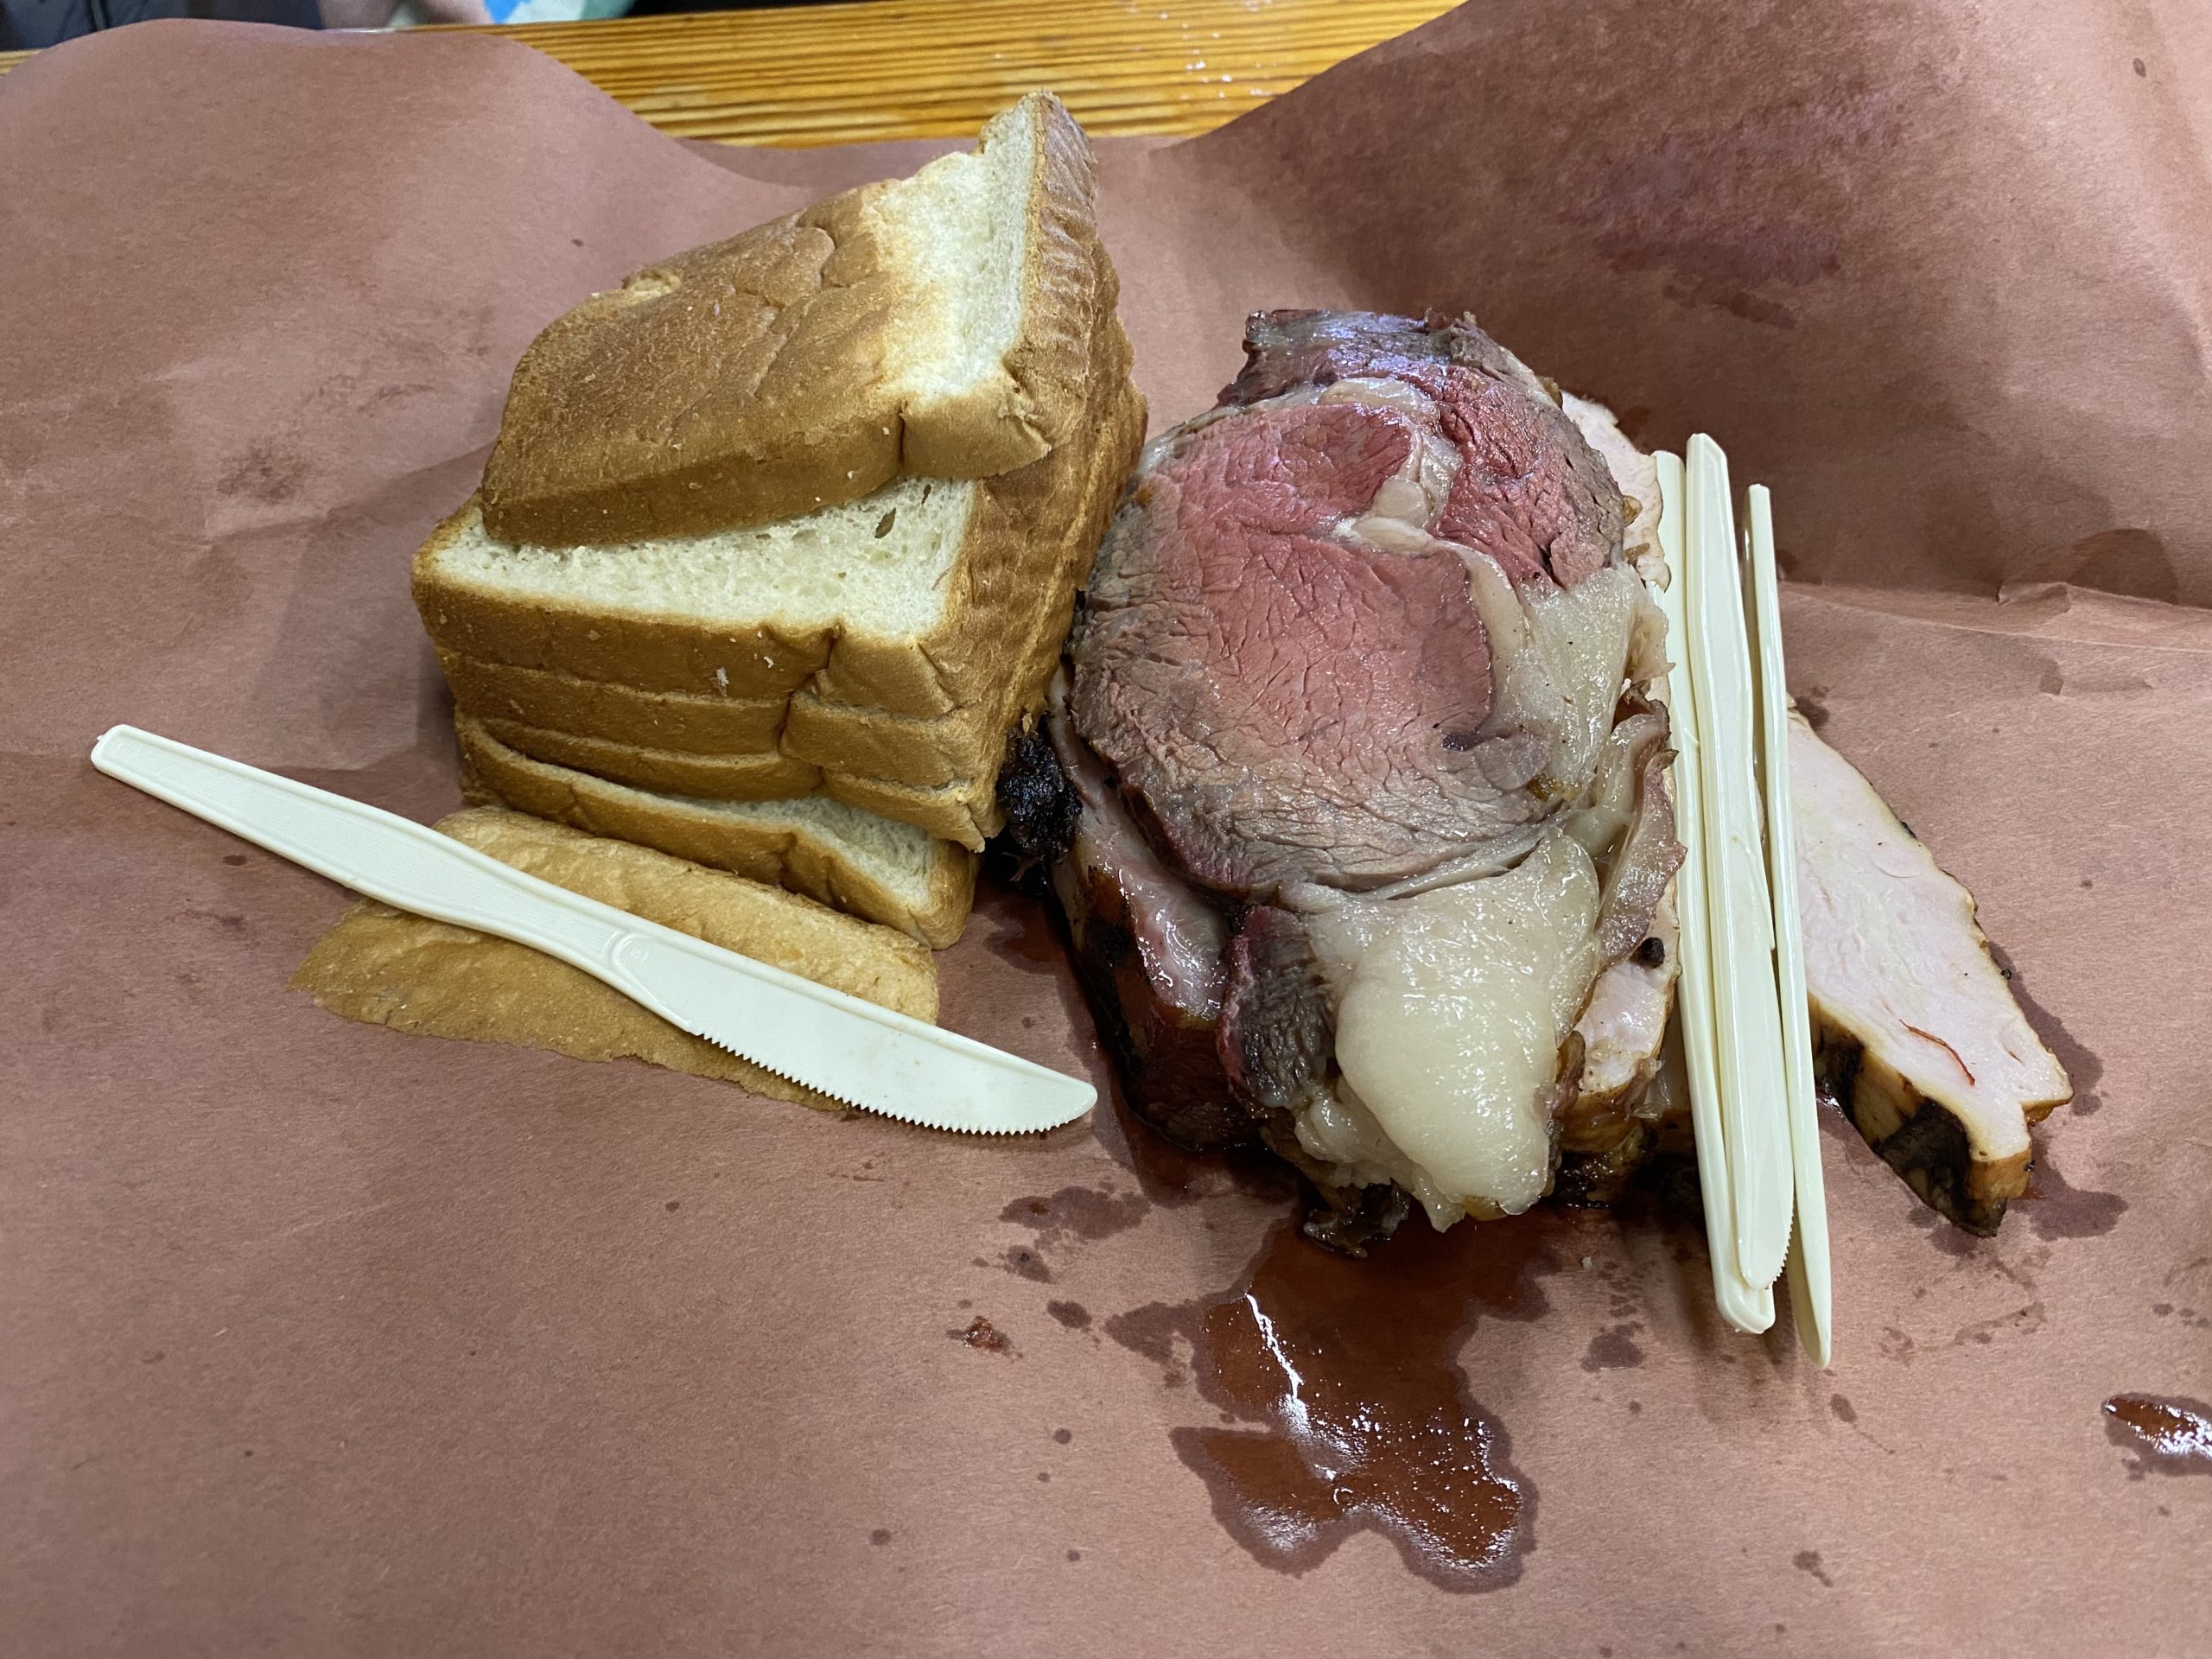 a piece of meat and bread on a brown paper